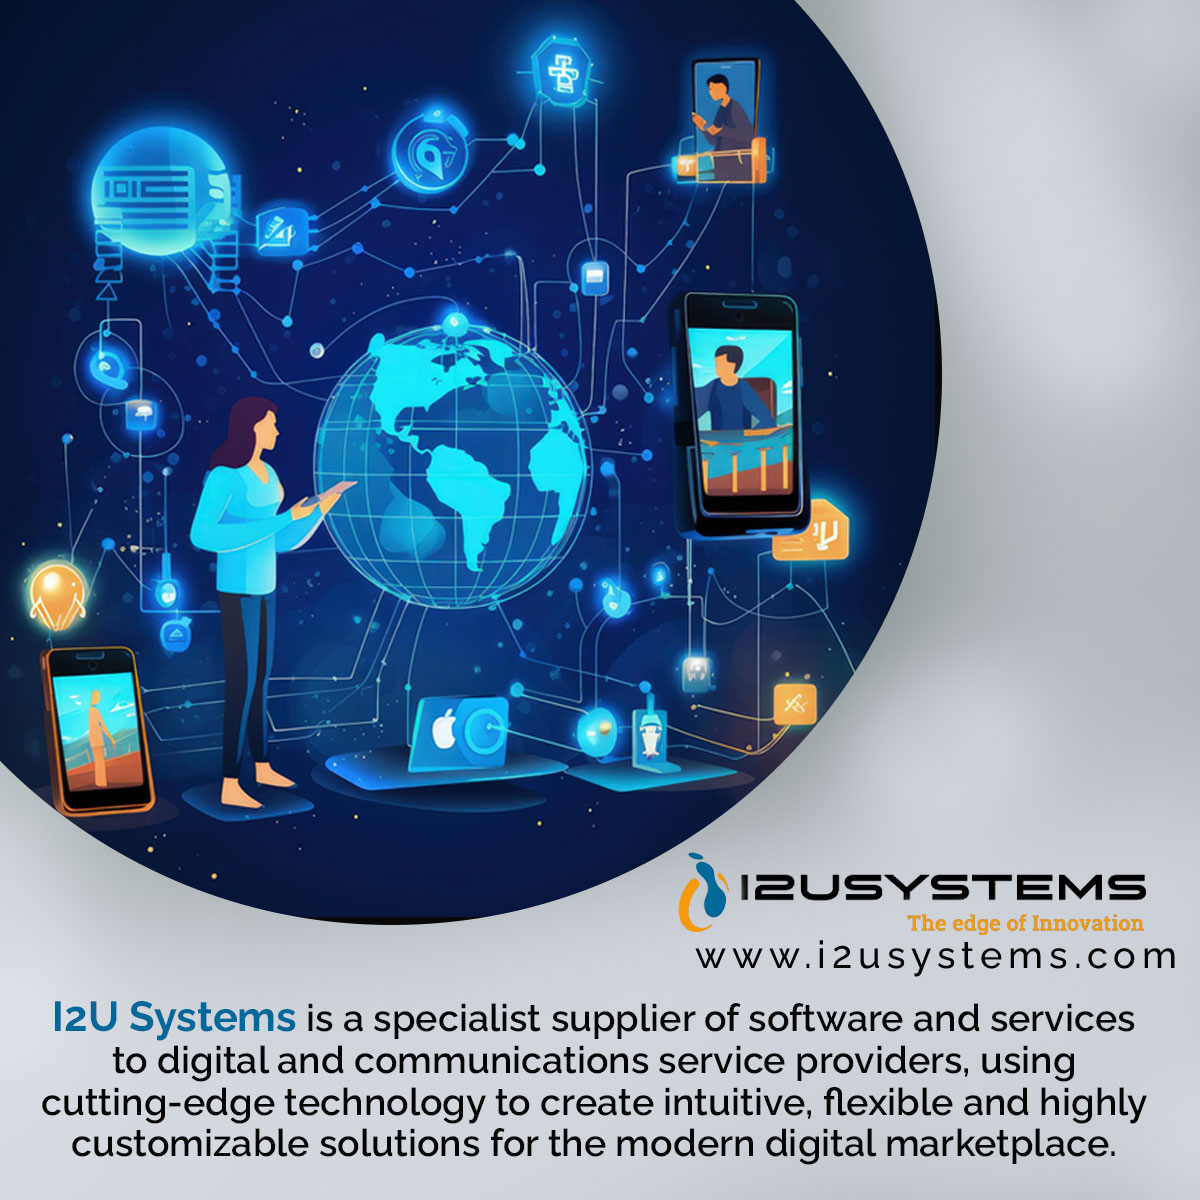 I2U Systems is a specialist supplier of software and services to digital and communications service providers. #i2usystems #c2crequirements #w2jobs #directclient #jobs #recruiters #benchsales #IOT #digital #communications #technology #flexible #highly #marketplace